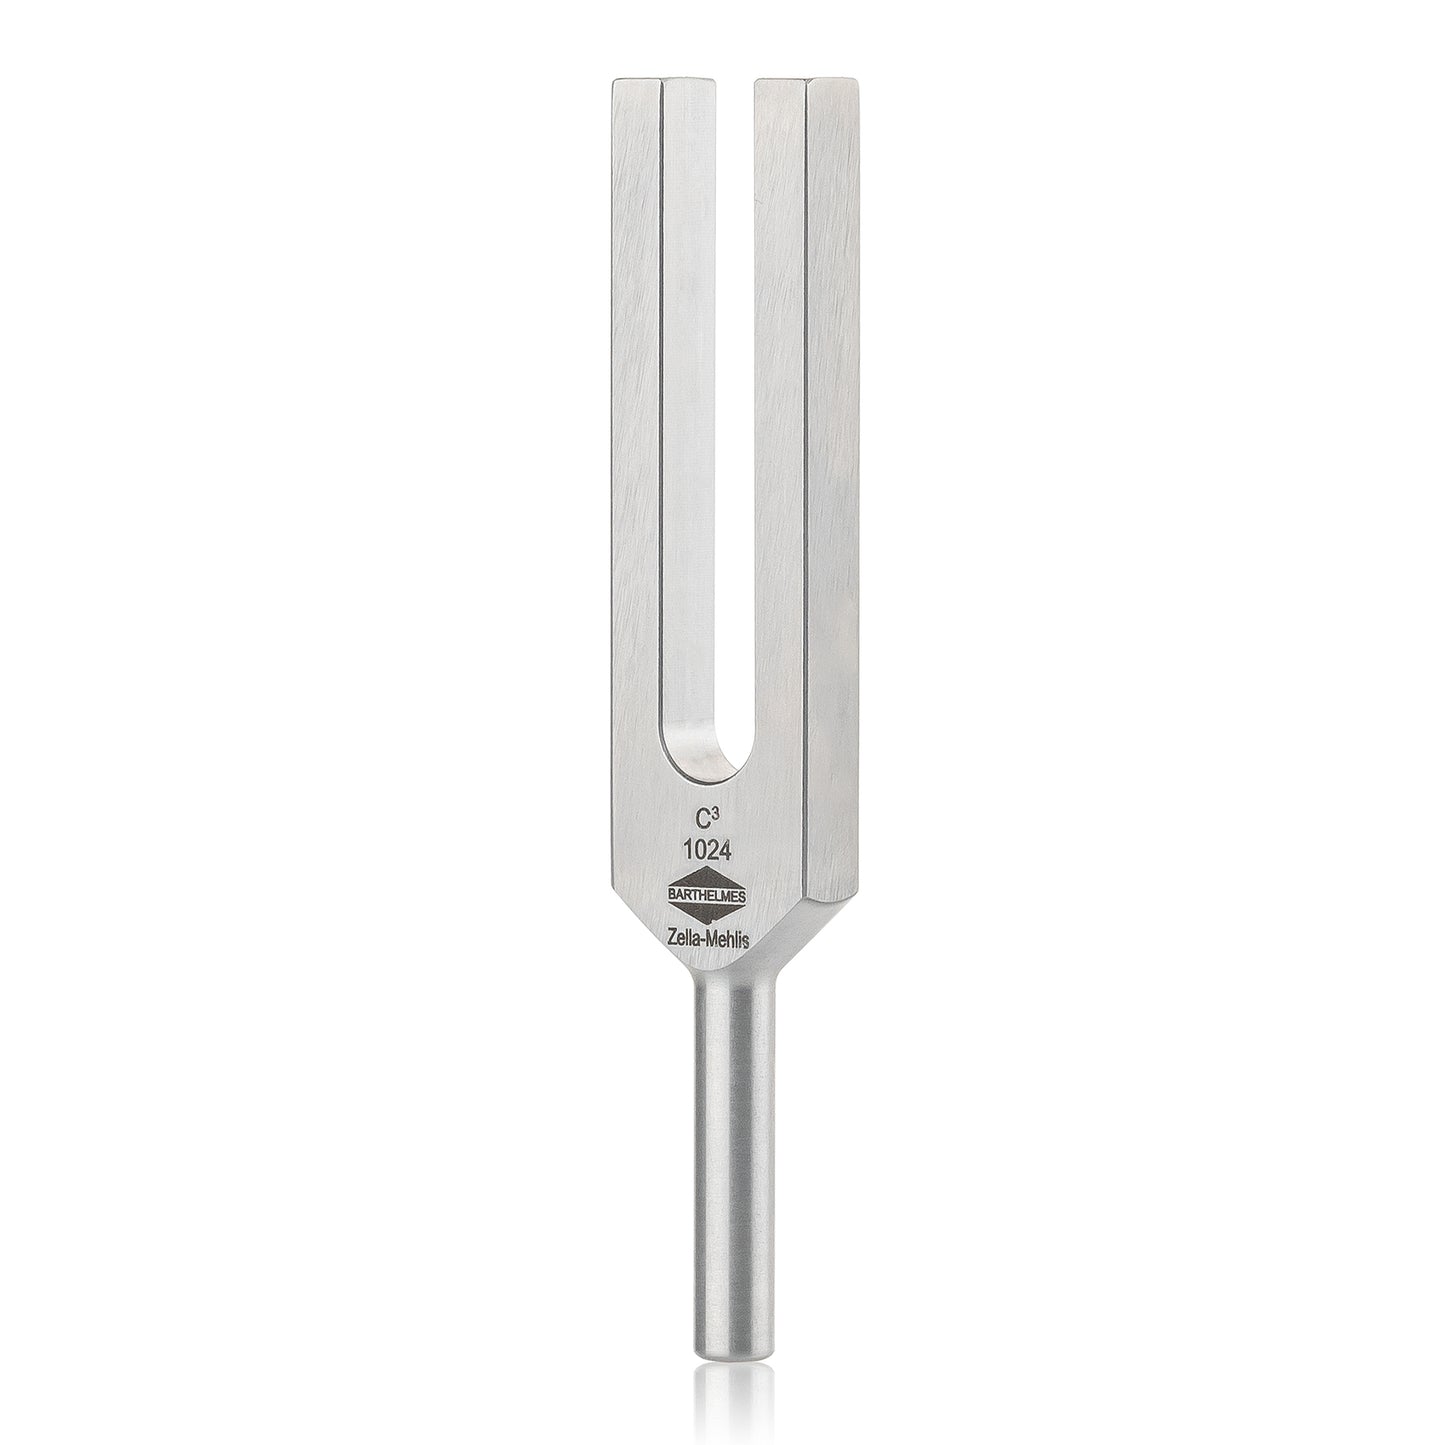 Barthelmes tuning fork c3 1024 Hz for ear doctors made of light metal